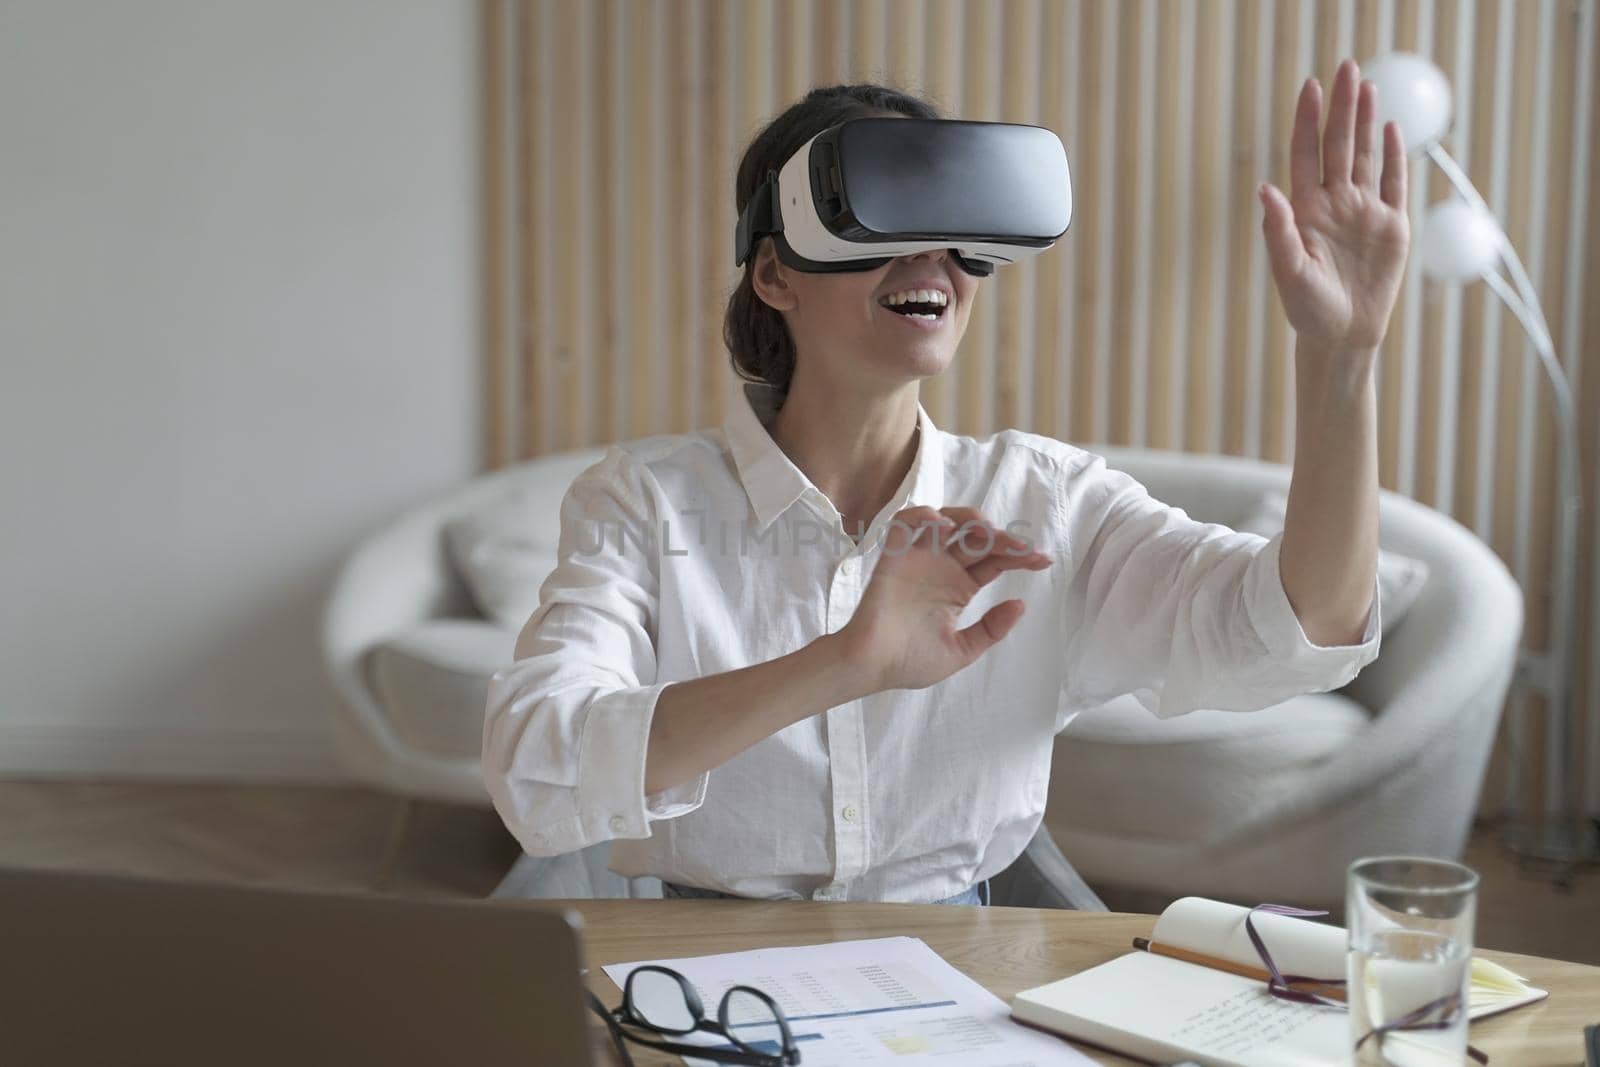 Cyberspace in business. Happy woman office worker wearing vr goggles, touching objects with hands in digital world, amazed businesswoman in 3d glasses interacting with virtual reality at work